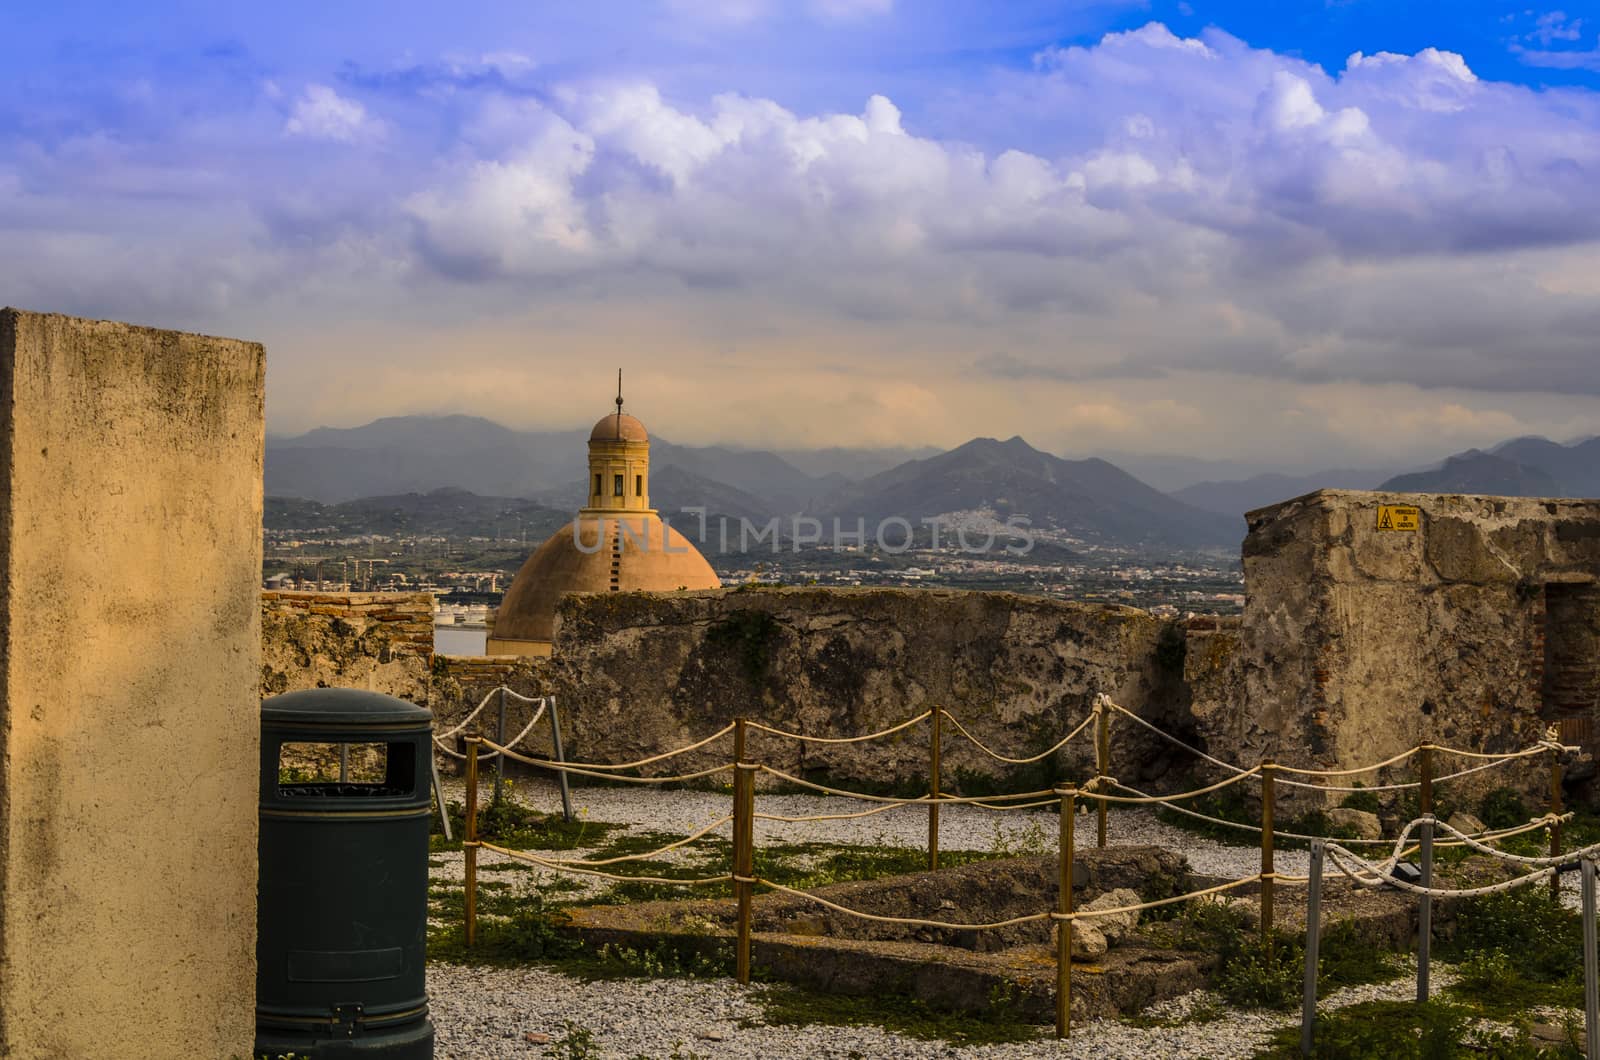 Mountainous landscape of sicily with church dome from the defenses of the norman castle of milazzo